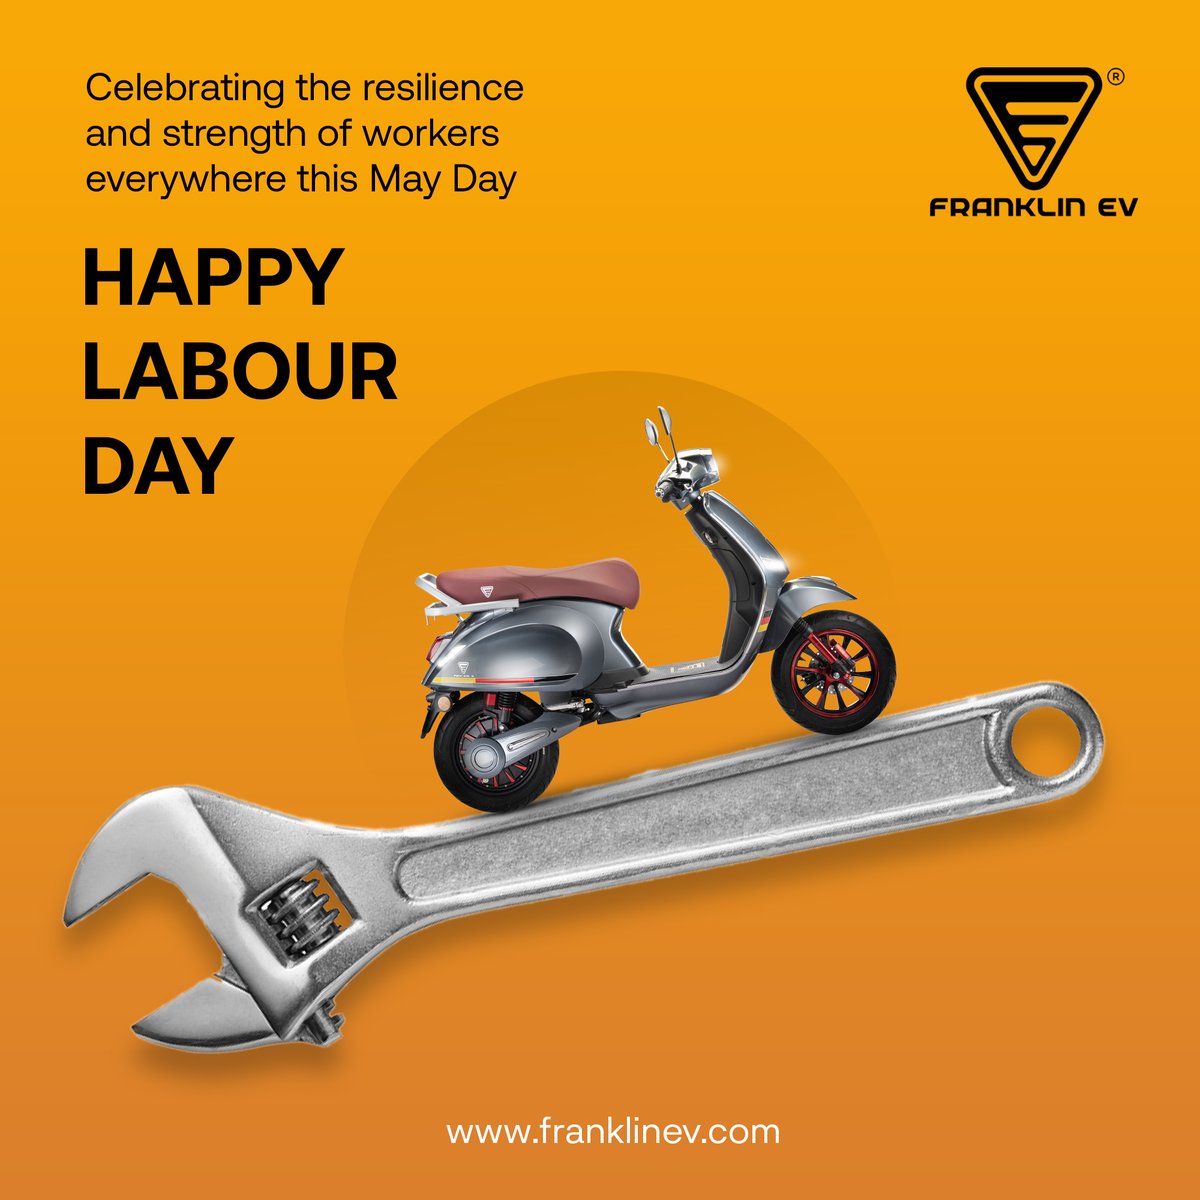 Celebrating the resilience  and strength of workers everywhere this May Day

HAPPY LABOUR DAY

#franklinev #labourday #electricscooter #bestscooter